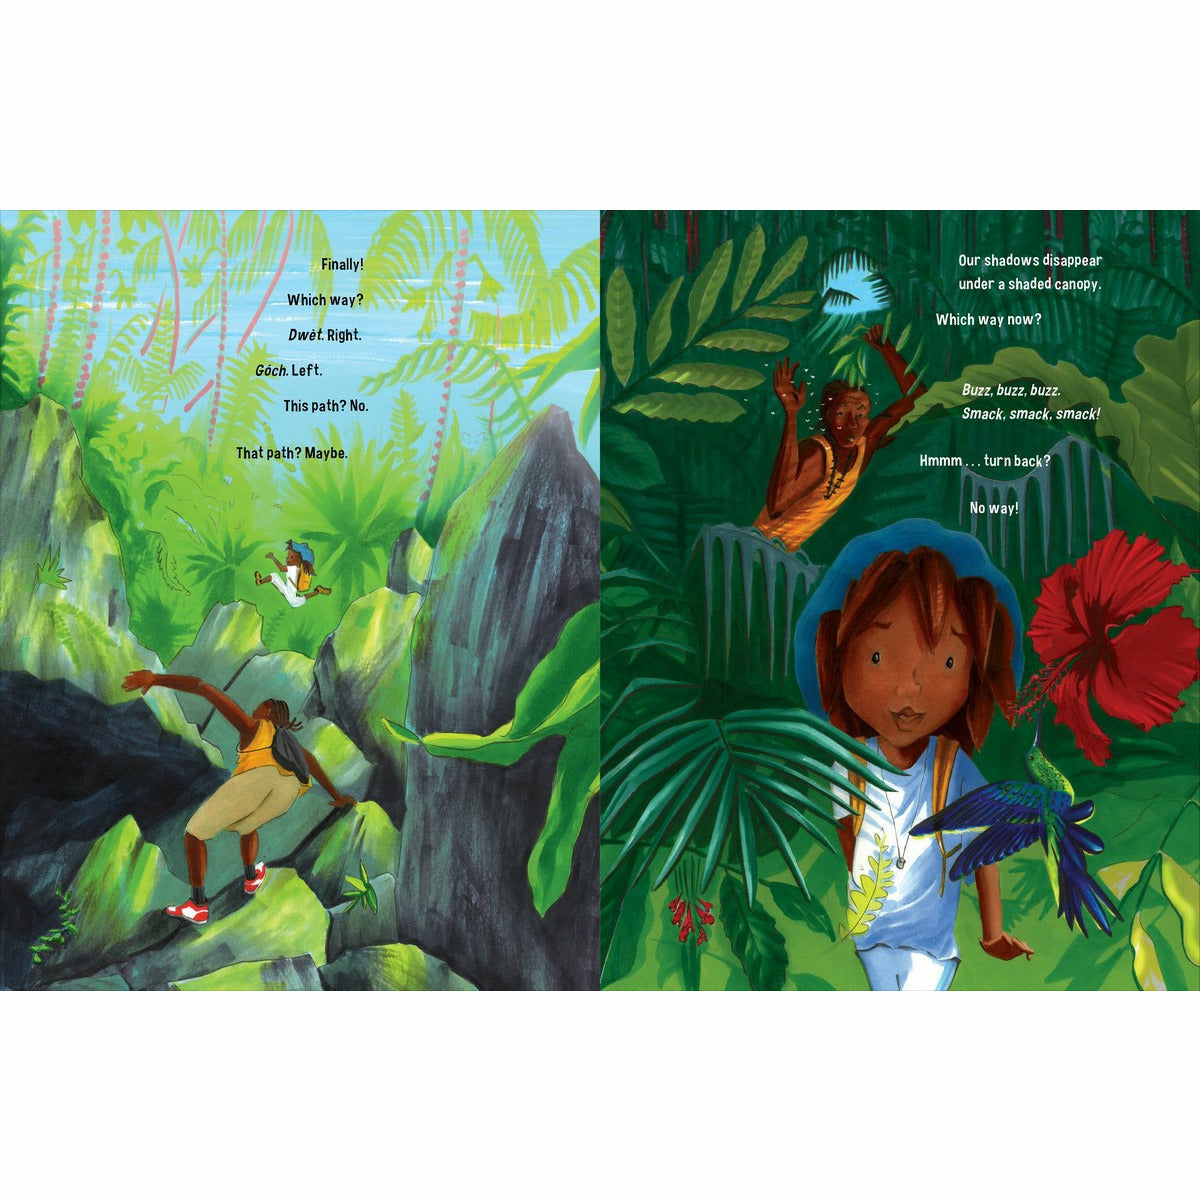 Climb On! by Baptiste Paul, illustrated by Jacqueline Alcántara, front cover of a childrens picture book the image is of a father and daughter climbing a mountain in a tropical setting. Daughter is running ahead and the father is battling mosquitoes